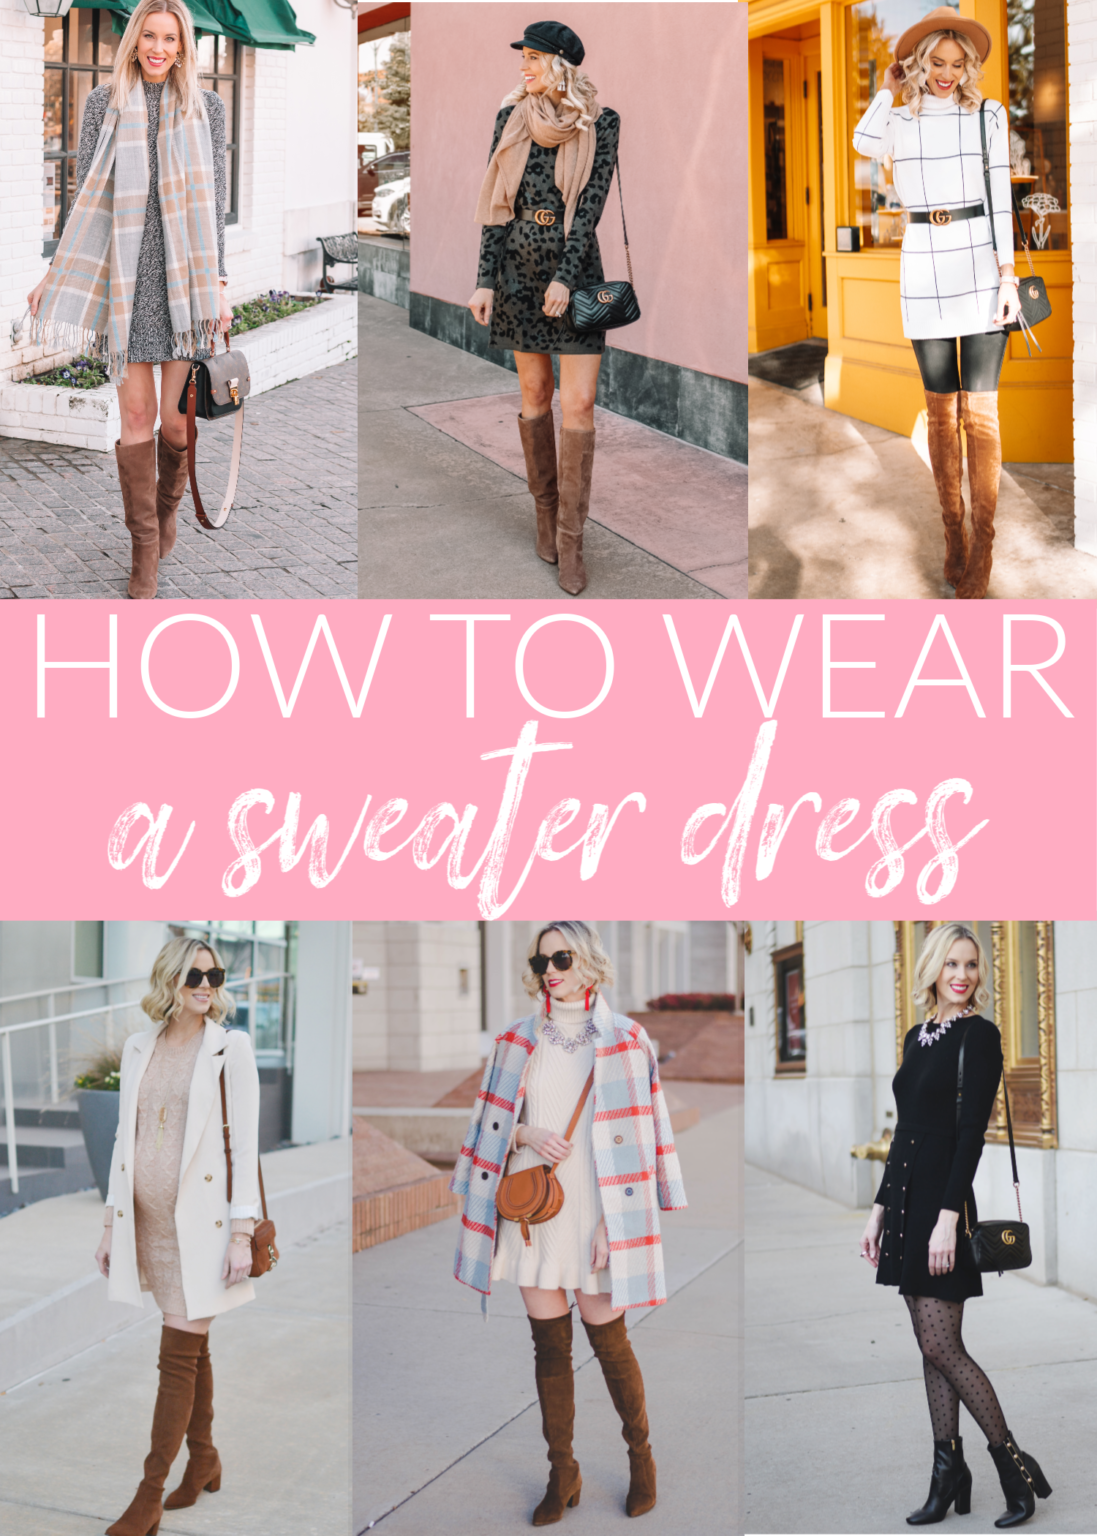 How to Wear a Sweater Dress - Outfit Ideas - Straight A Style